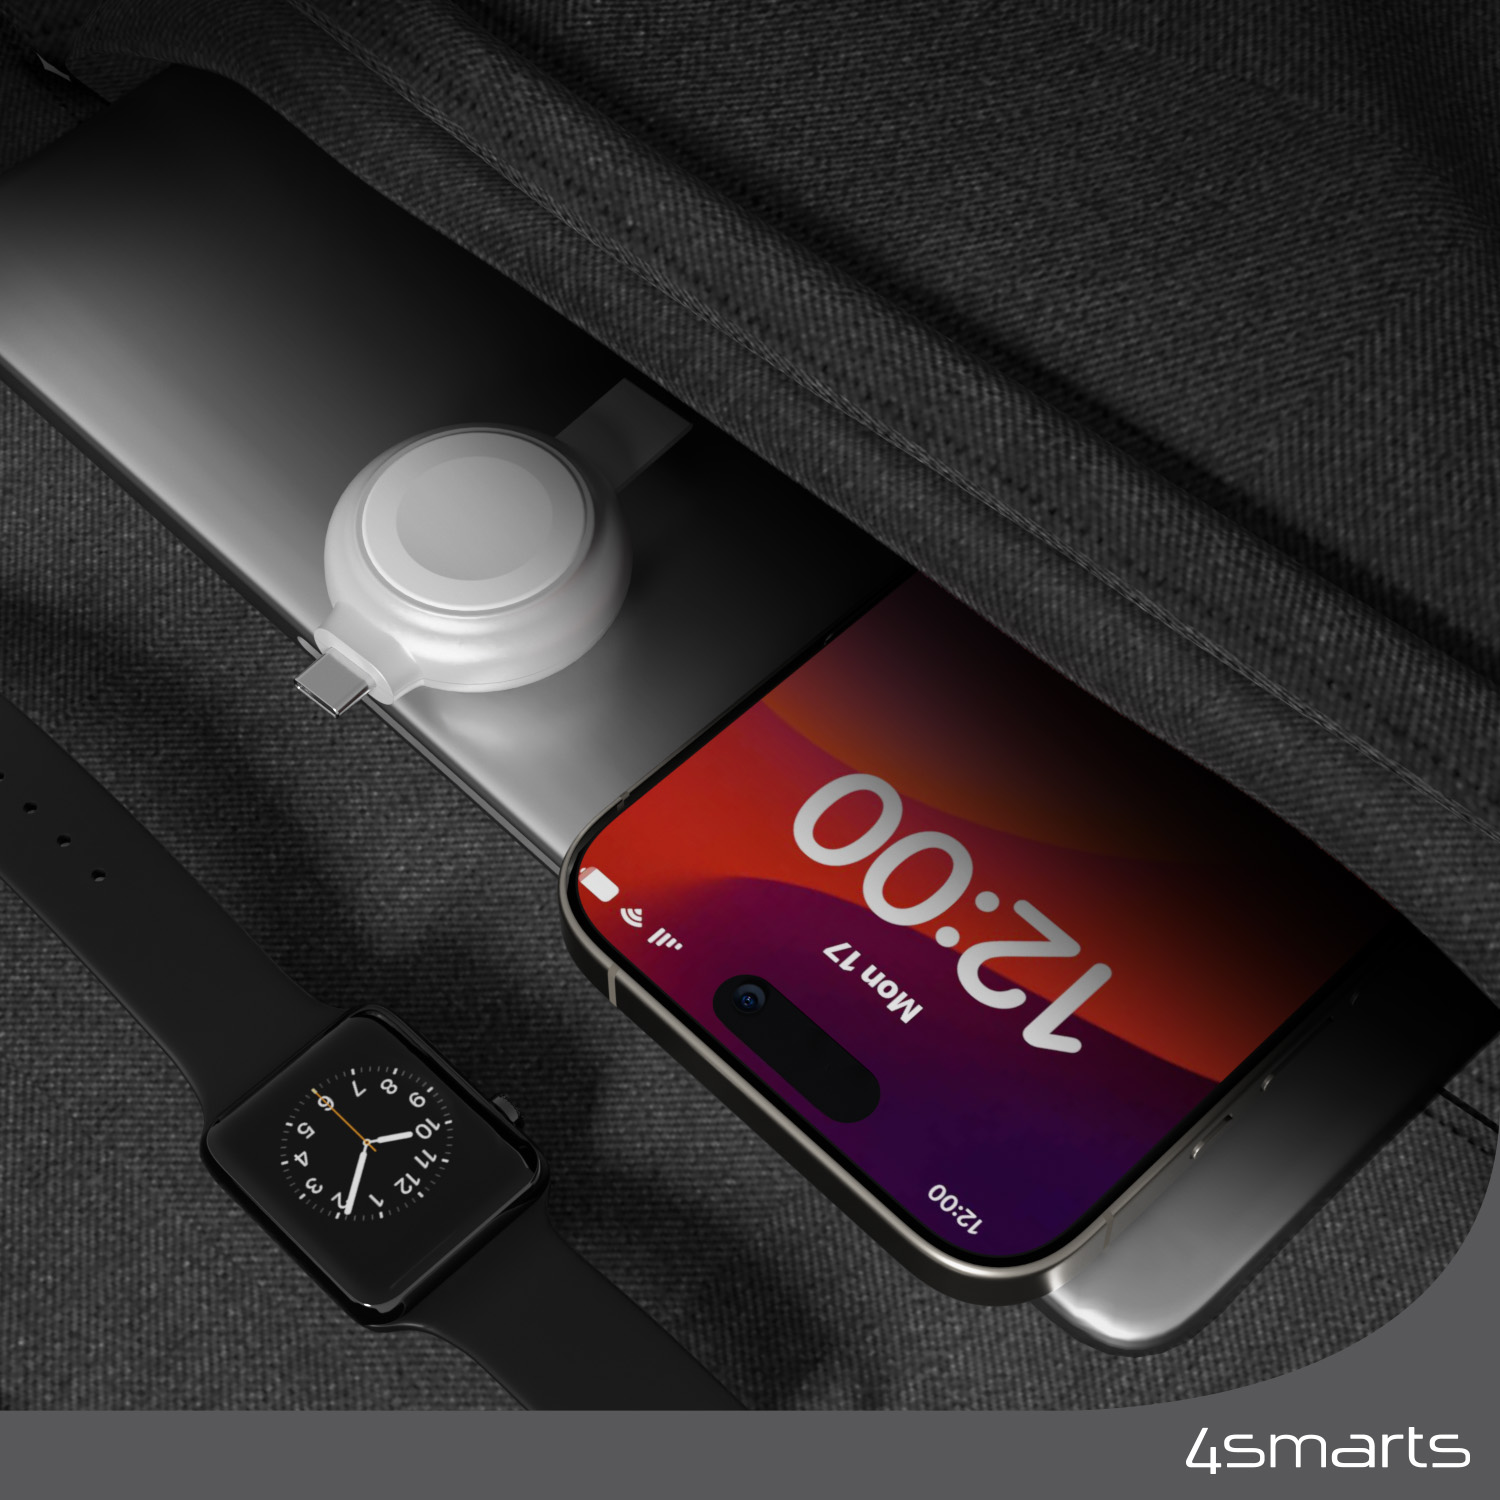 You can easily take the 4smarts MFi Fast Charger for Apple Watch with you wherever you go.